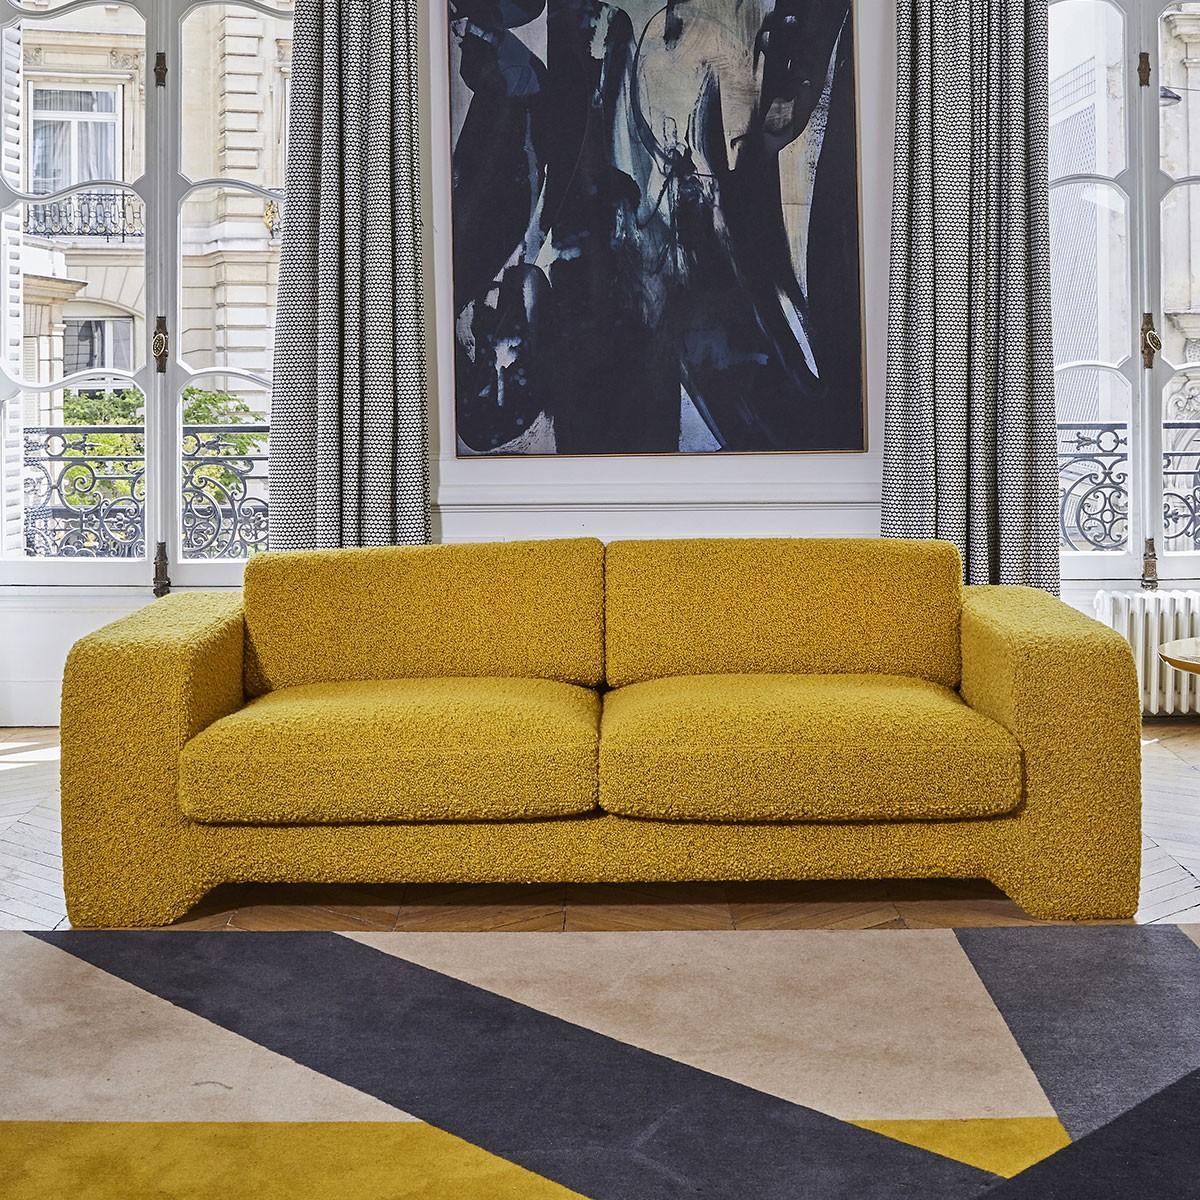 Popus Editions Giovanna 2.5 Seater Sofa in Green (772256) Como Velvet Upholstery

Giovanna is a sofa with a strong profile. A sober, plush line, with this famous detail that changes everything, so as not to forget its strength of character and